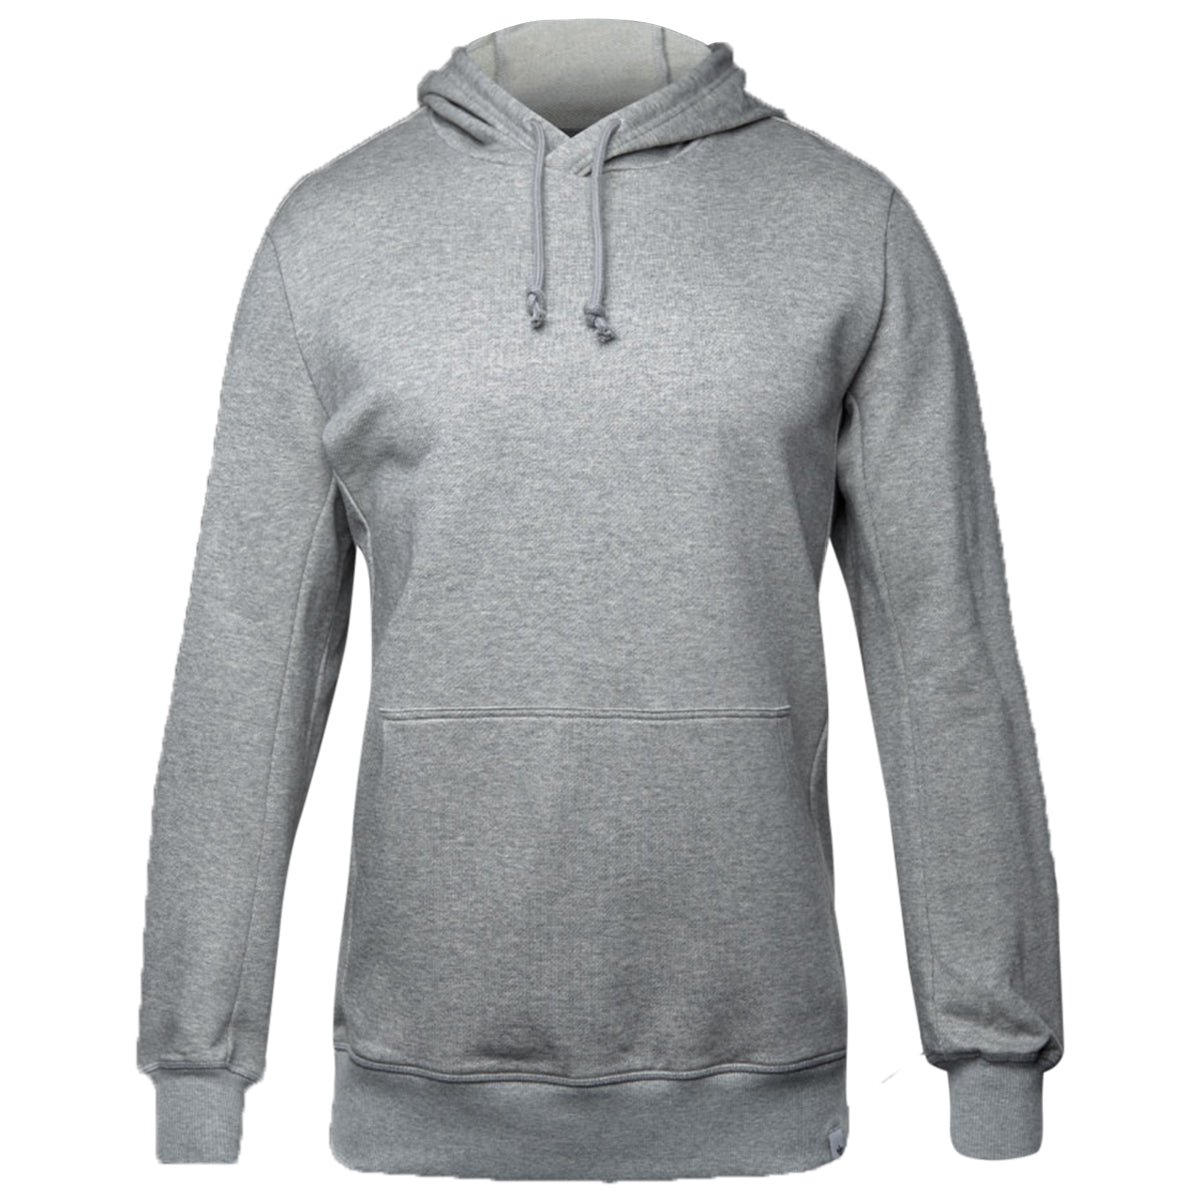 Adidas X By O Pullover Hoodie Mens Style : Bq3084